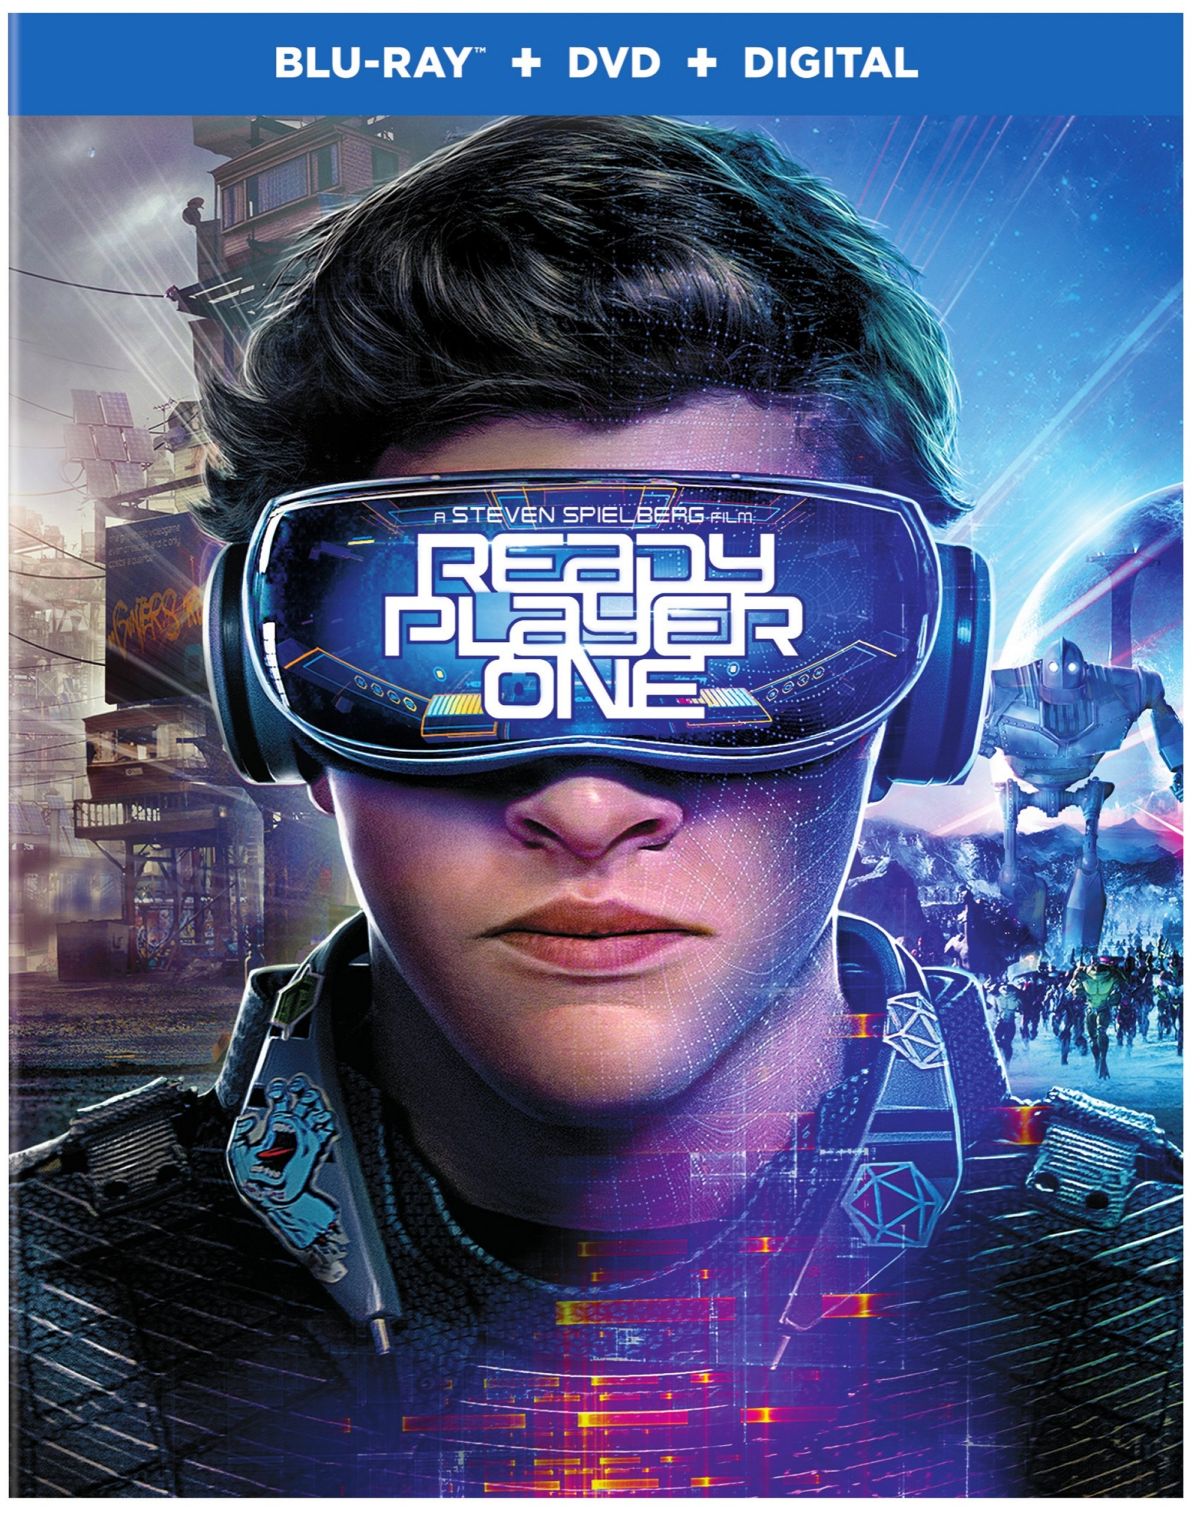 Ready Player One Blu-ray cover